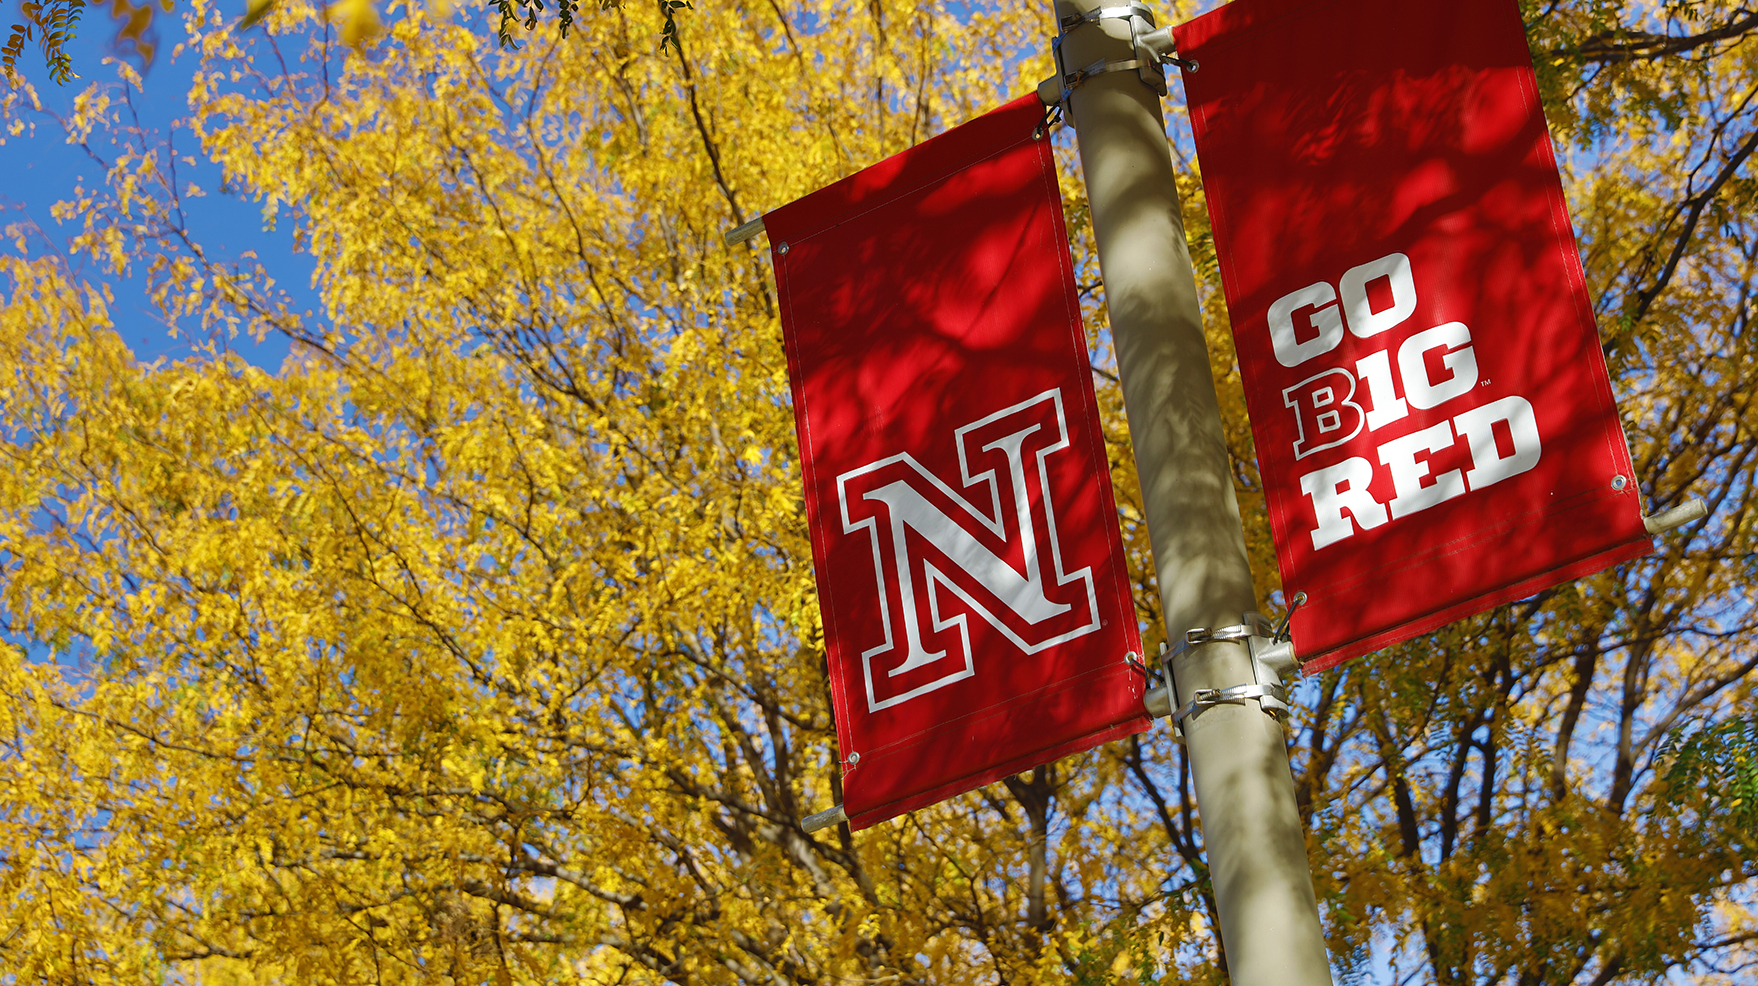 Next Wednesday, Nov. 24, is a student holiday, but university offices will still be open.